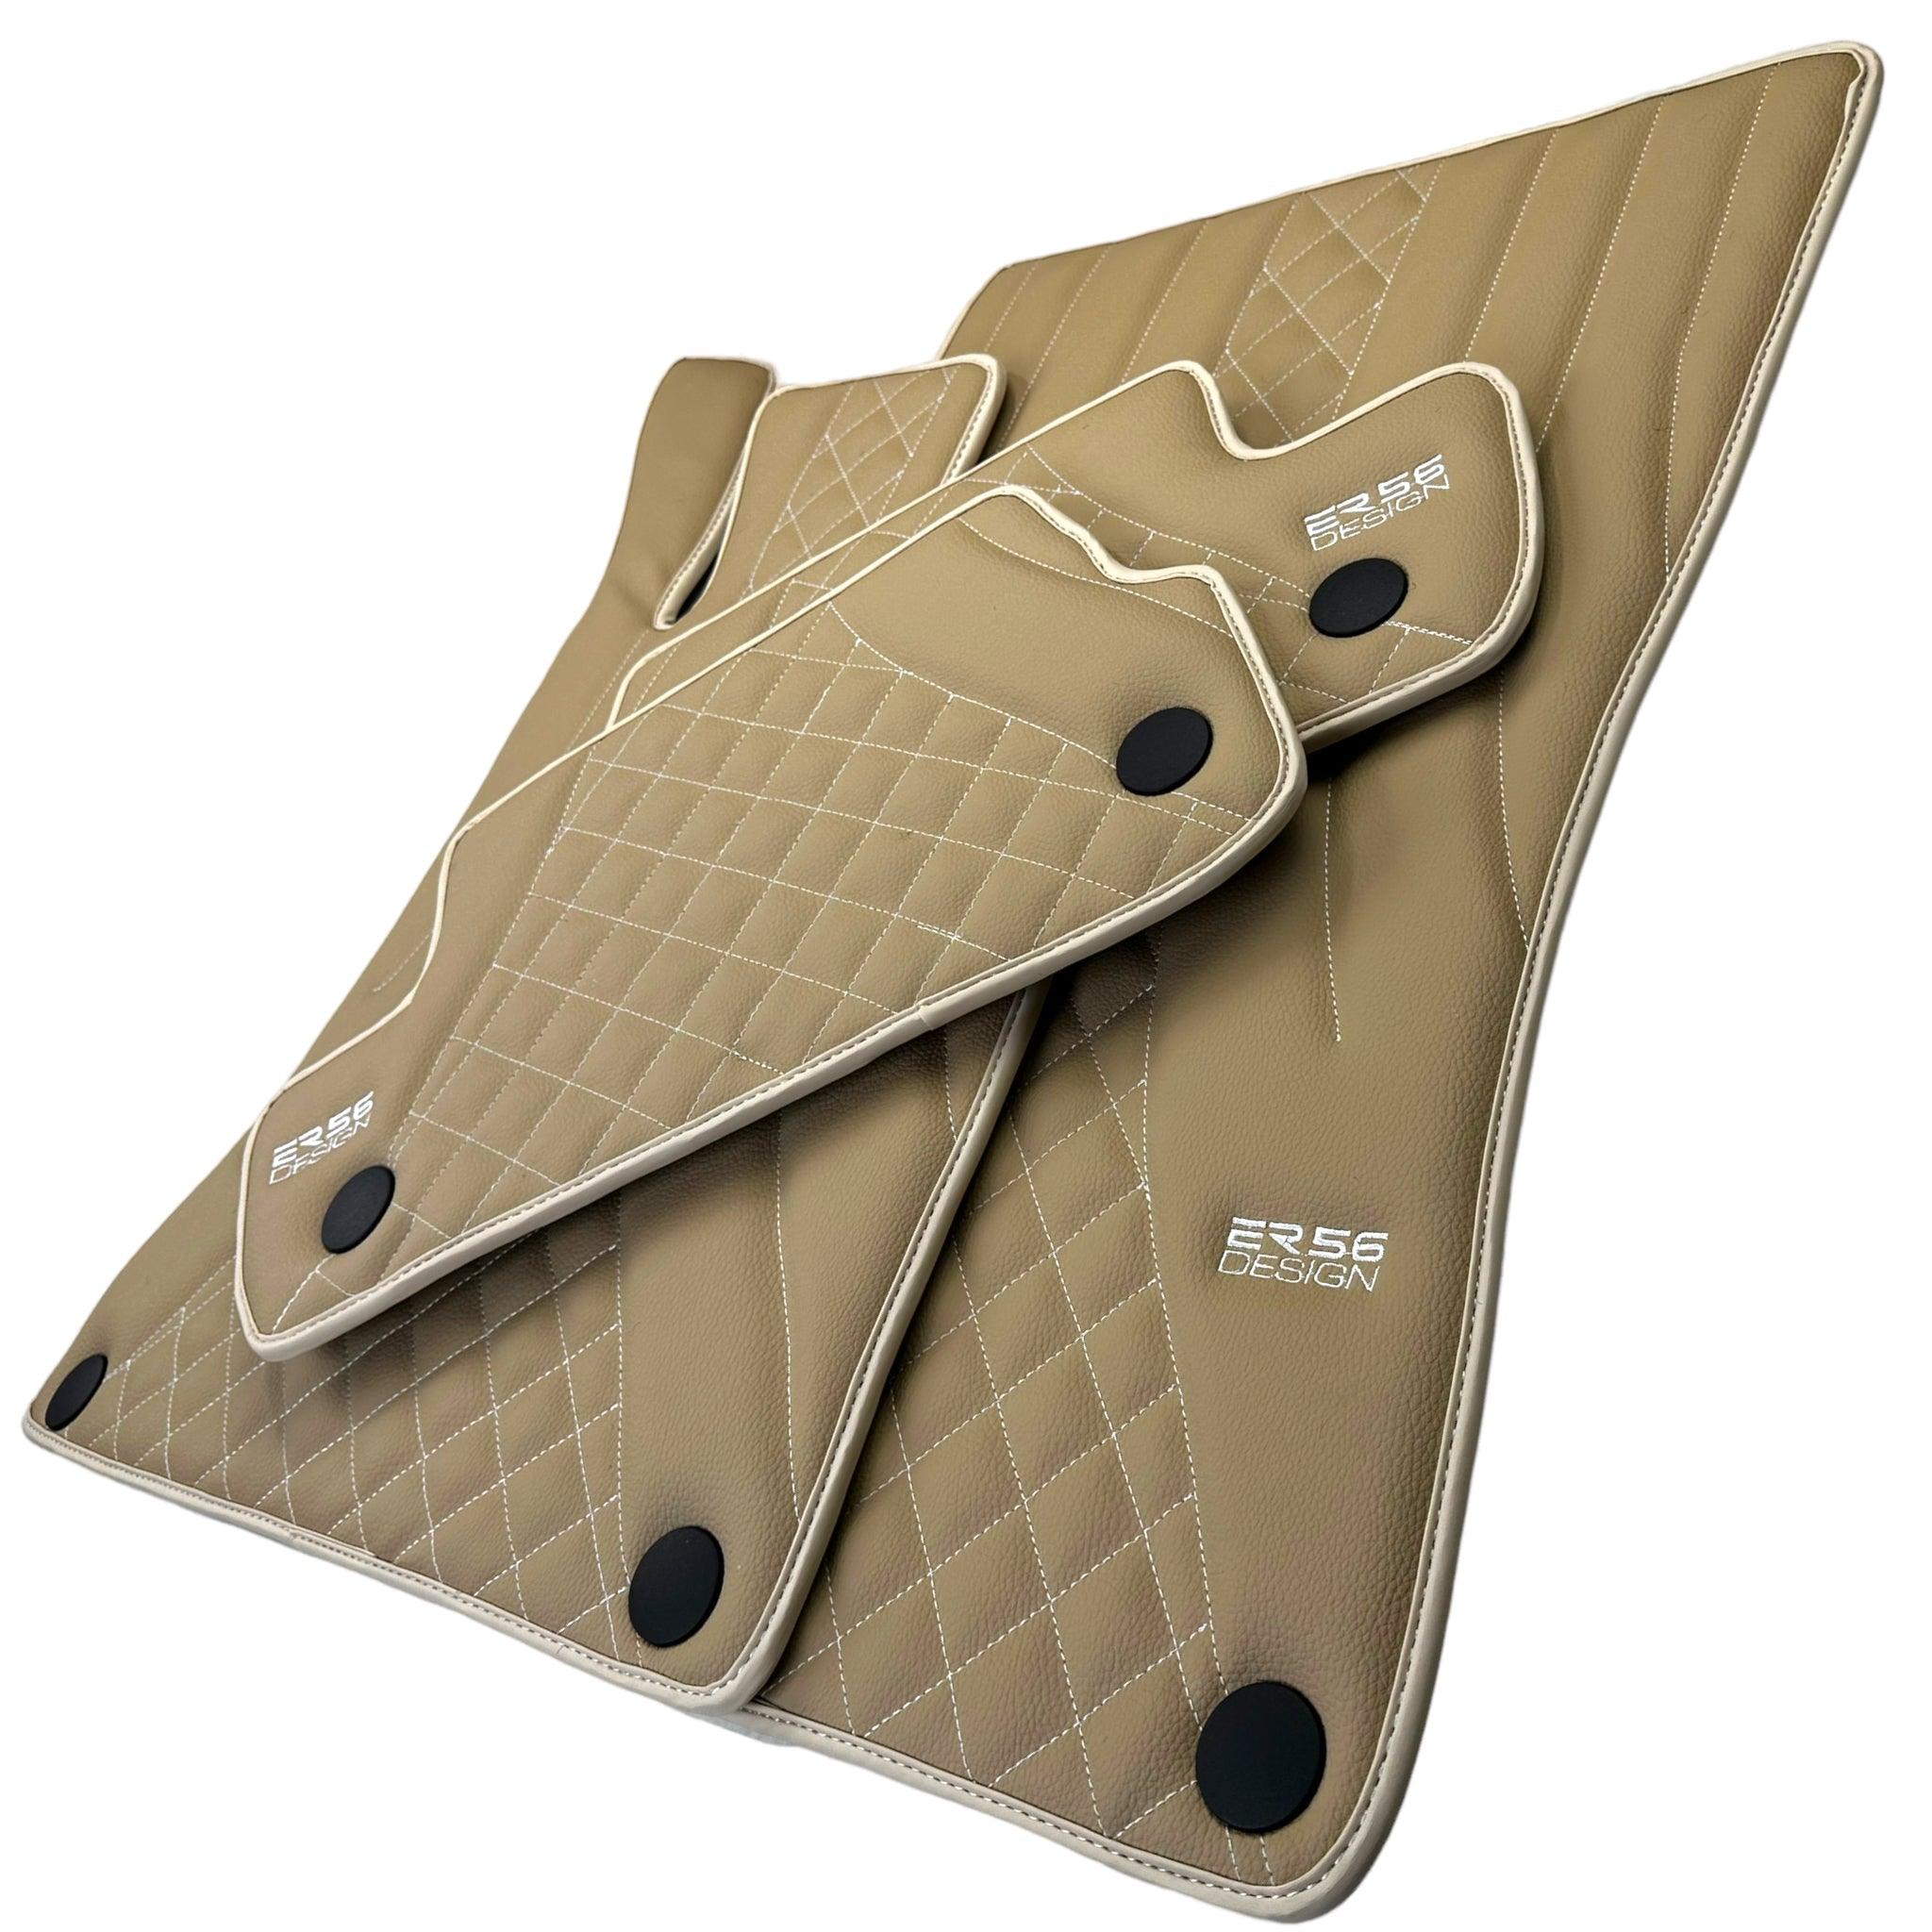 Beige Leather Floor Mats For Mercedes Benz C-Class C204 Coupe (2011-2015)